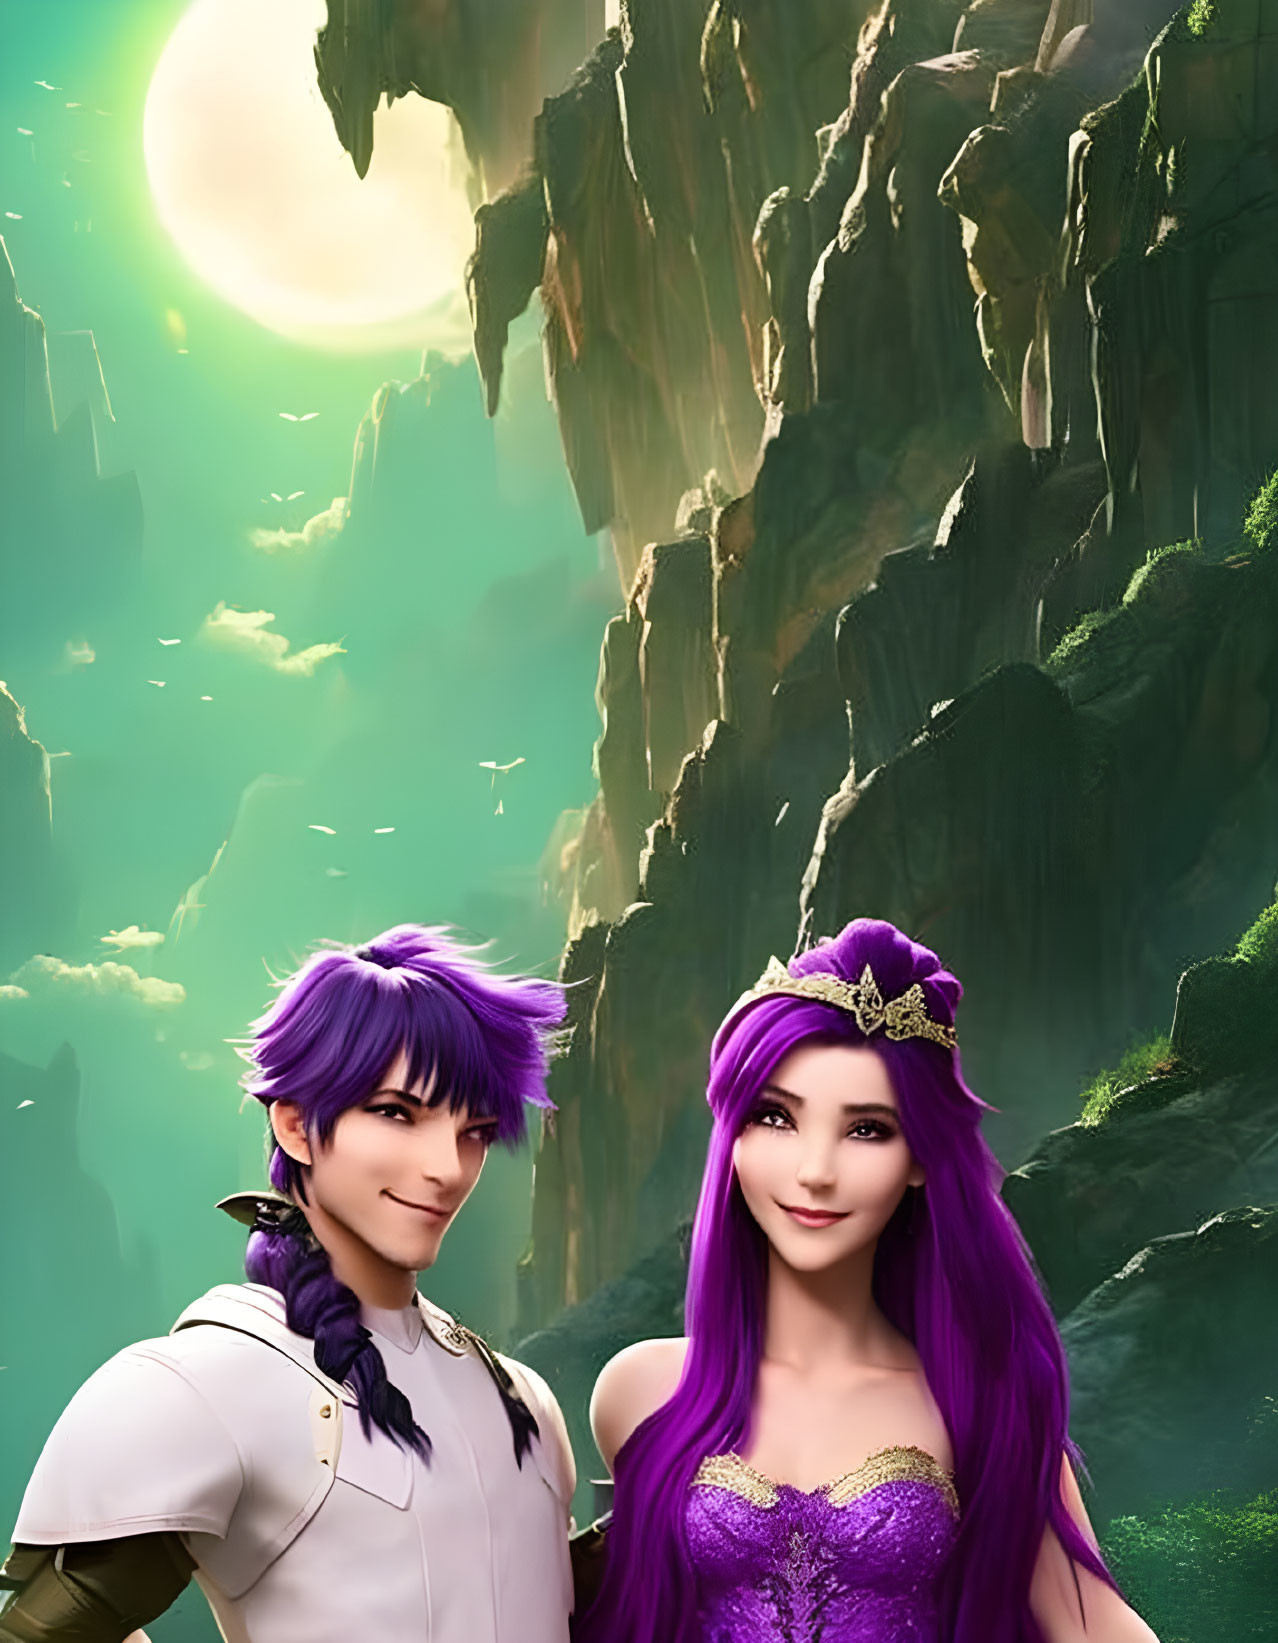 Animated characters with purple hair in fantasy attire against moonlit cliffs